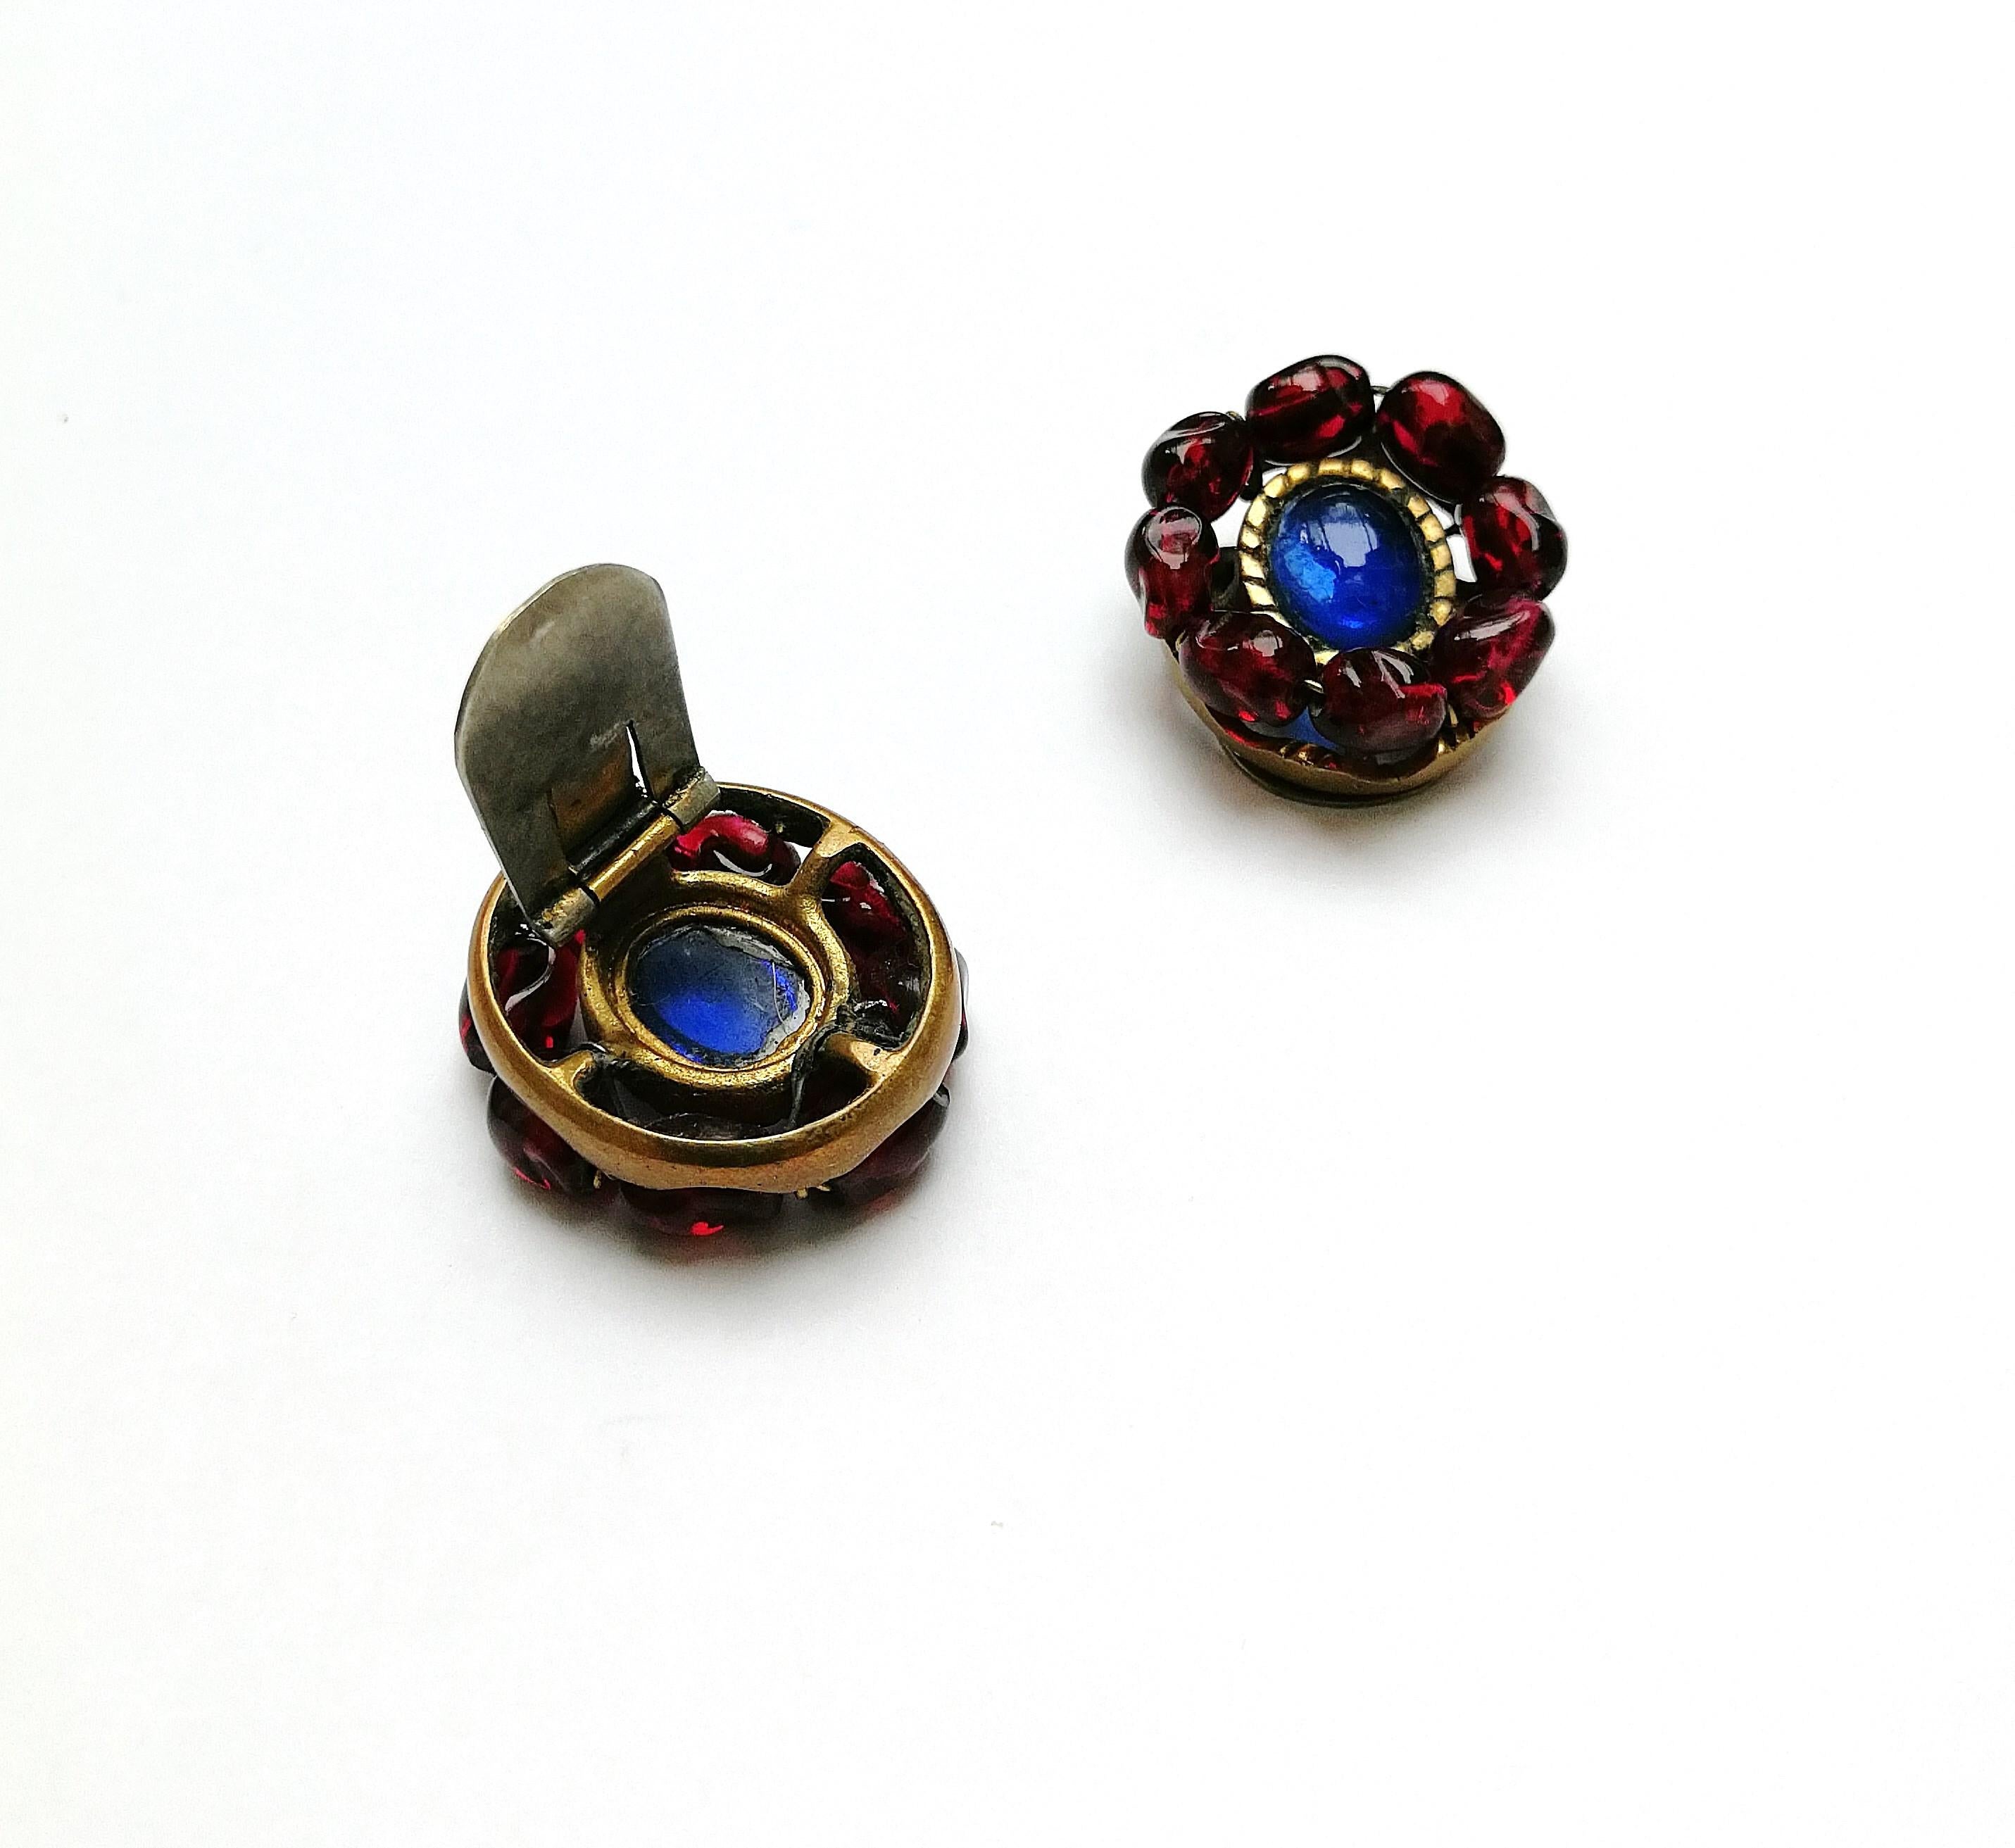 Ruby and sapphire poured glass earrings, att. Maison Gripoix for Chanel, 1930s. Damen